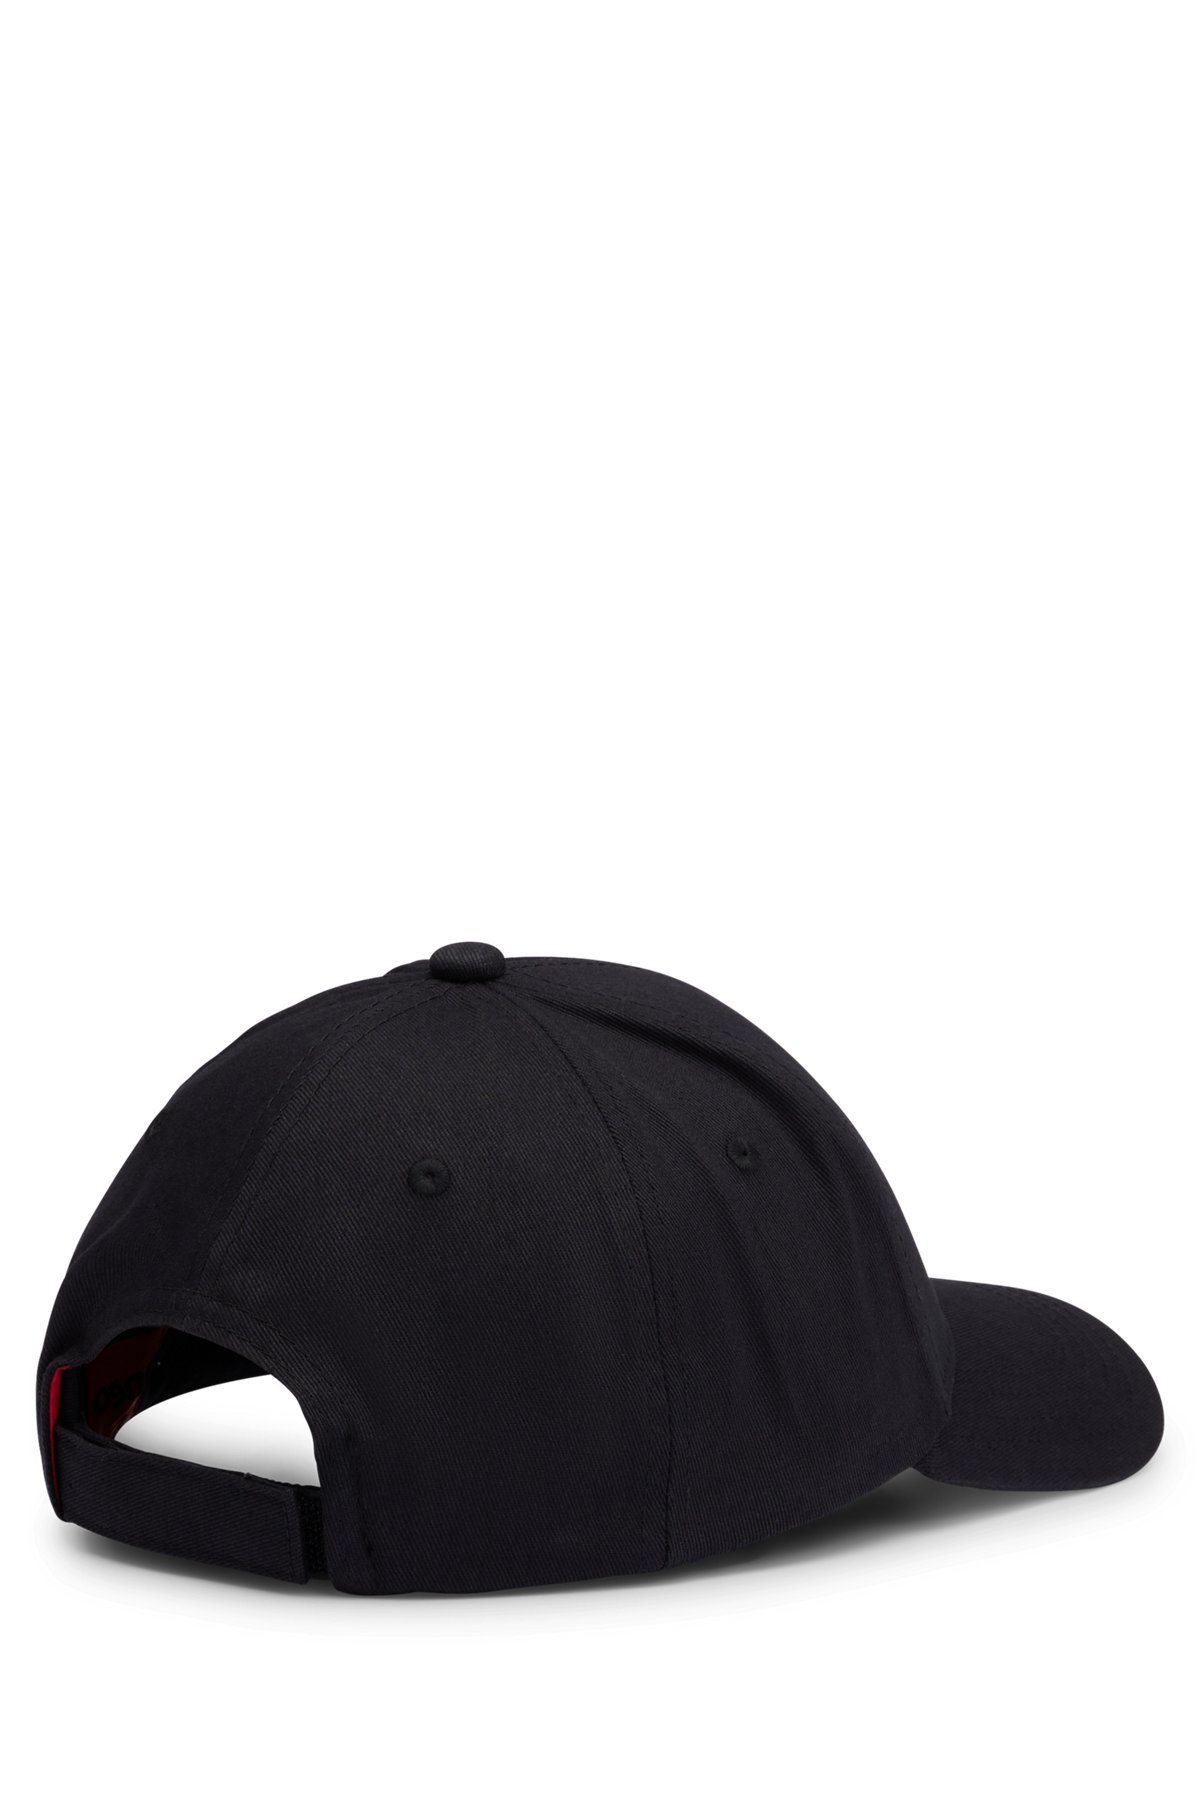 Cotton-twill cap with red logo label, Black